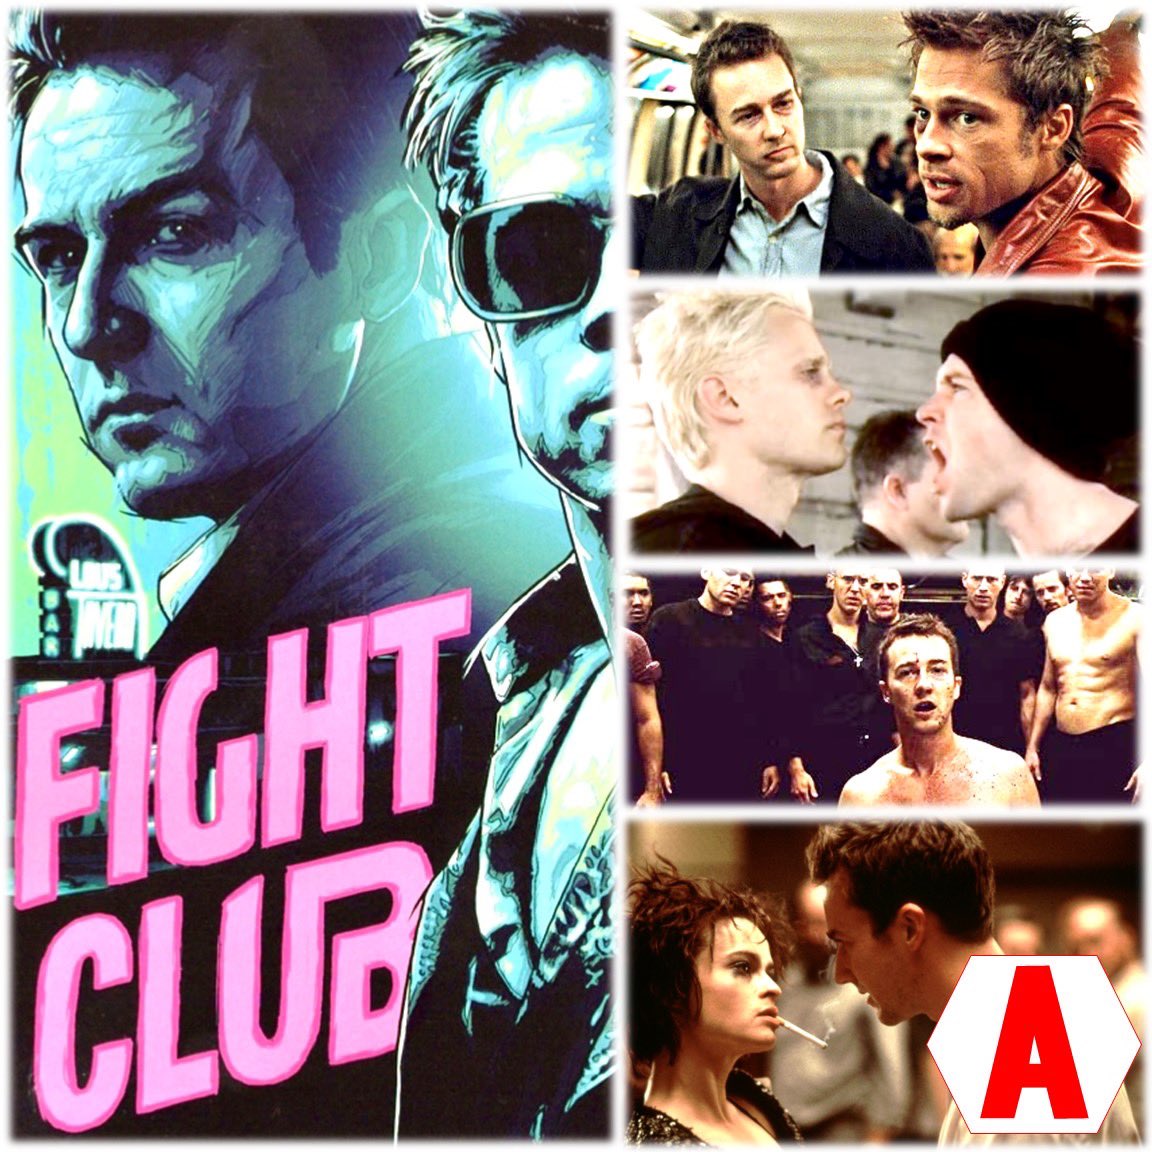 What's your pick for a perfect thriller/drama? It's Fight Club for me! #FightClub #filmtwitter #movies #films #filmcommunity #90sfilms #the90s #bradpitt #ednorton #90smovie